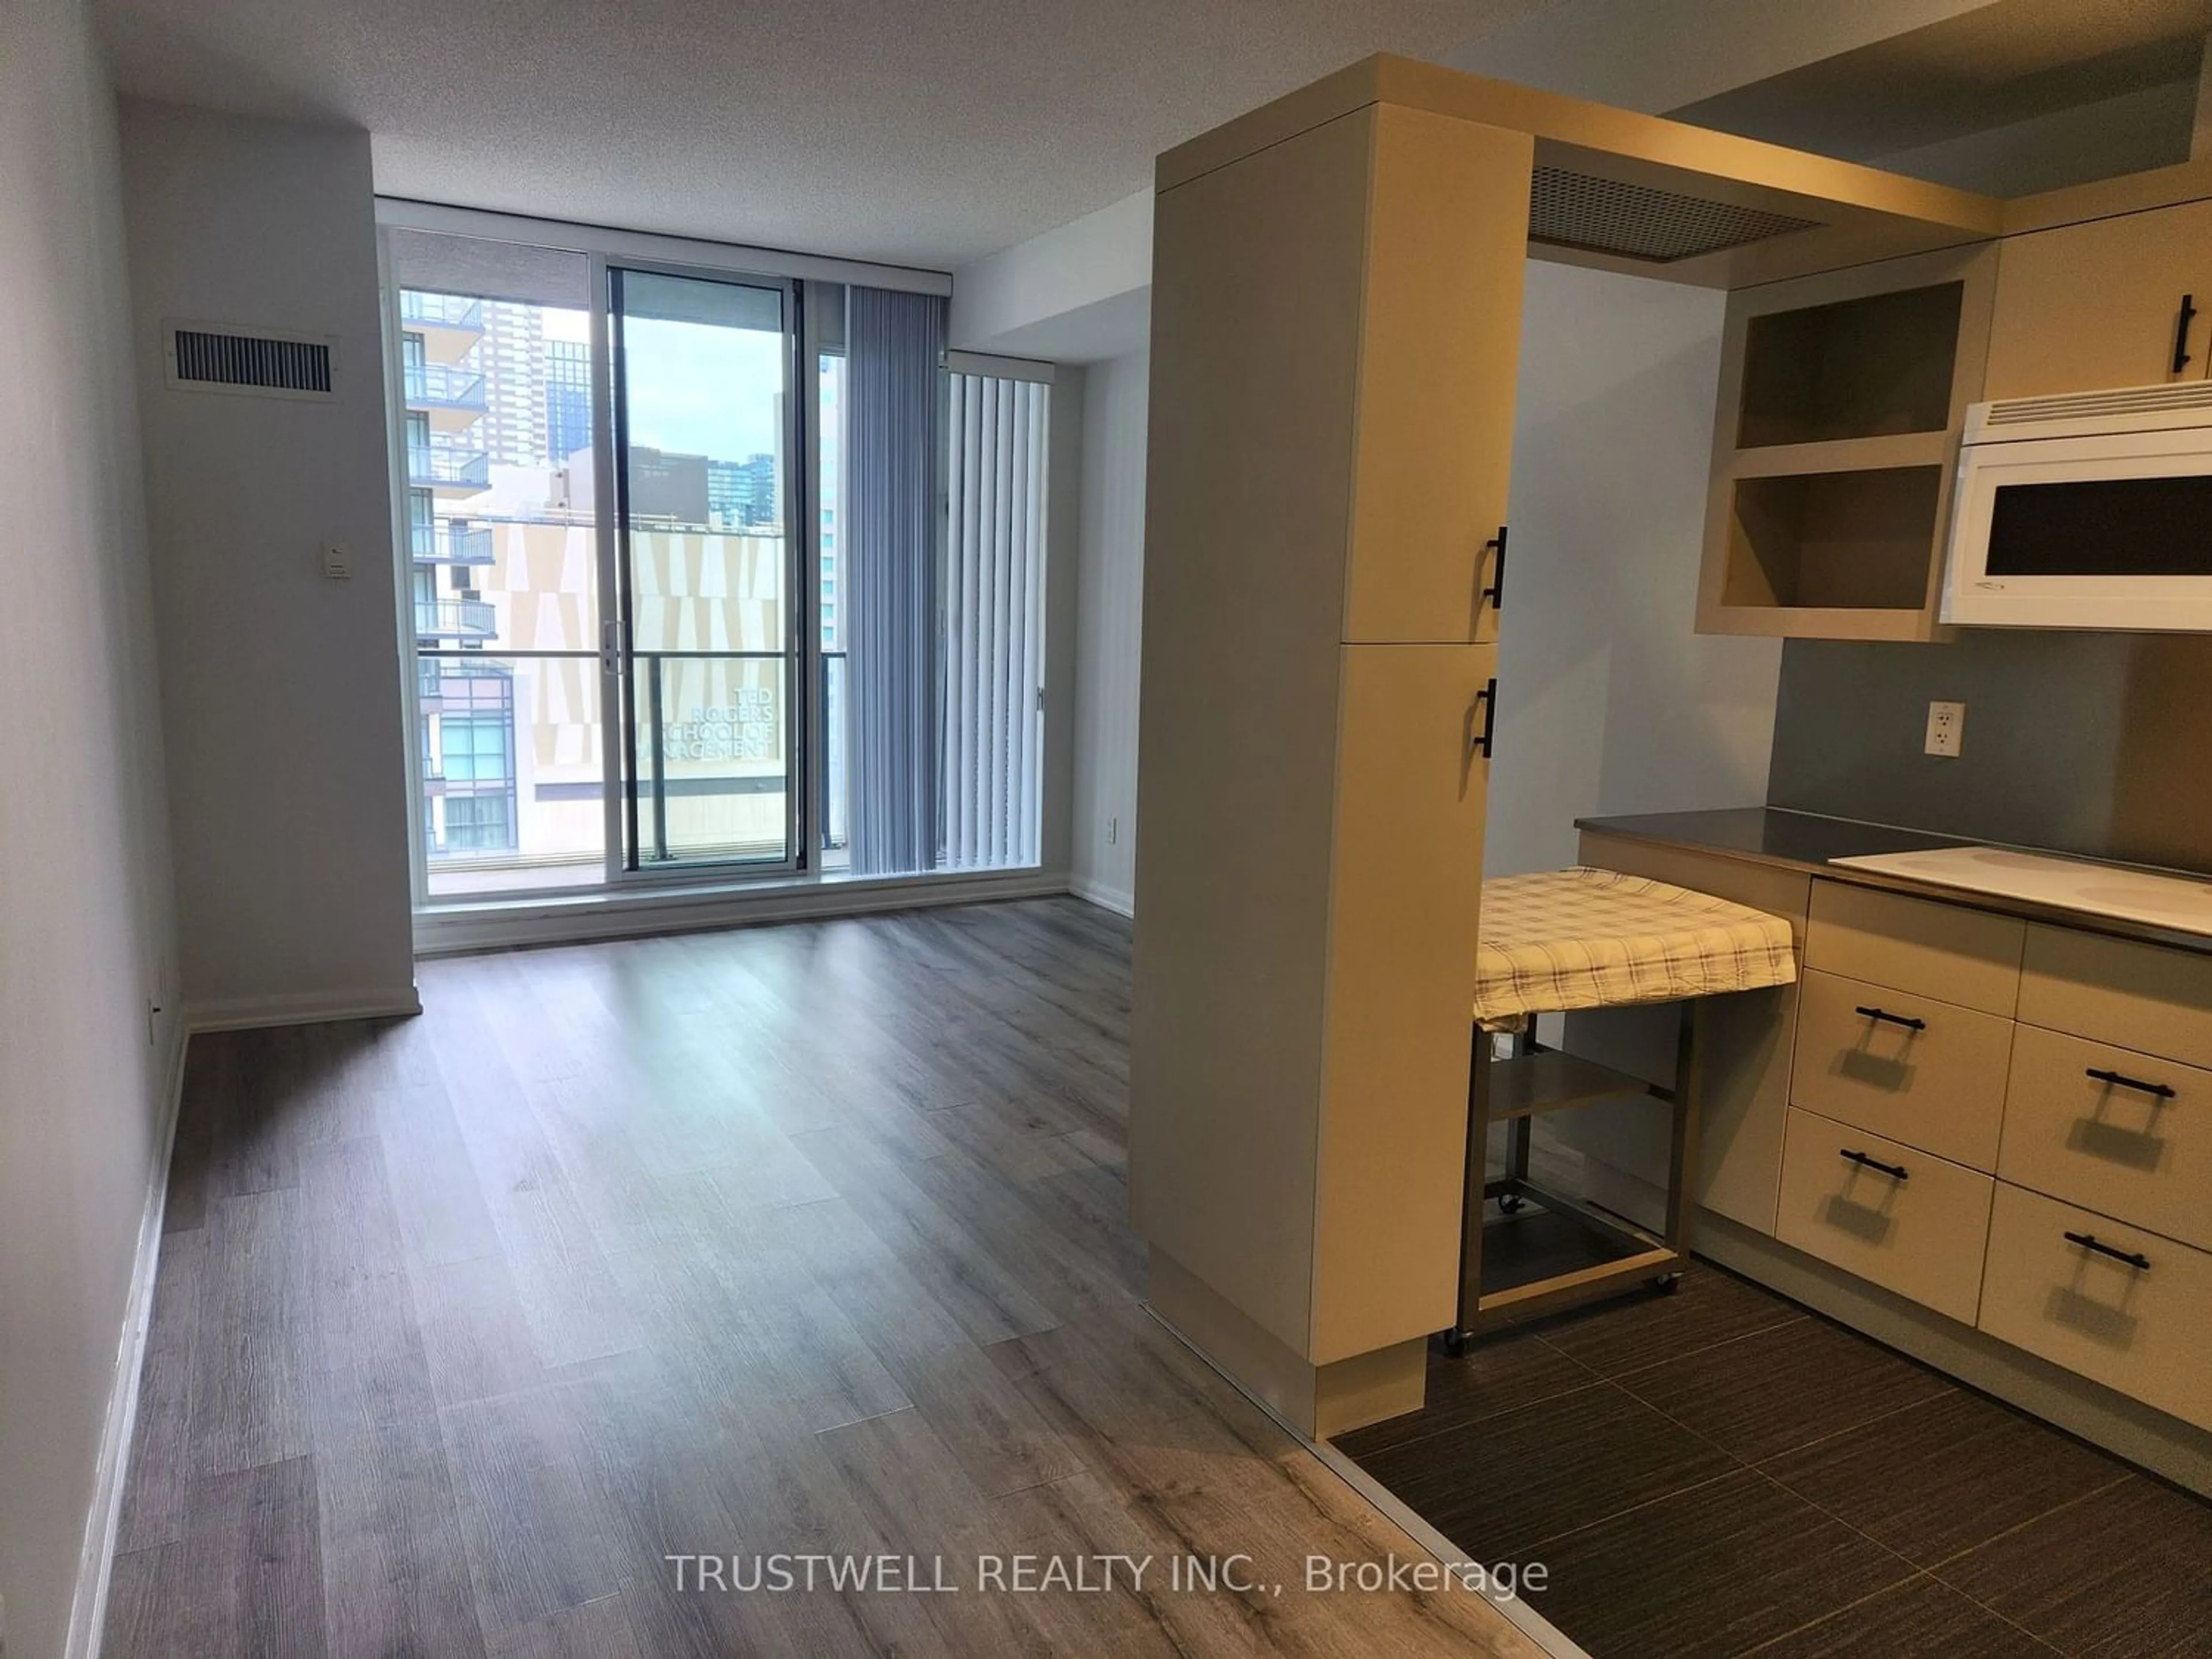 A pic of a room for 111 Elizabeth St #1251, Toronto Ontario M5G 1P7